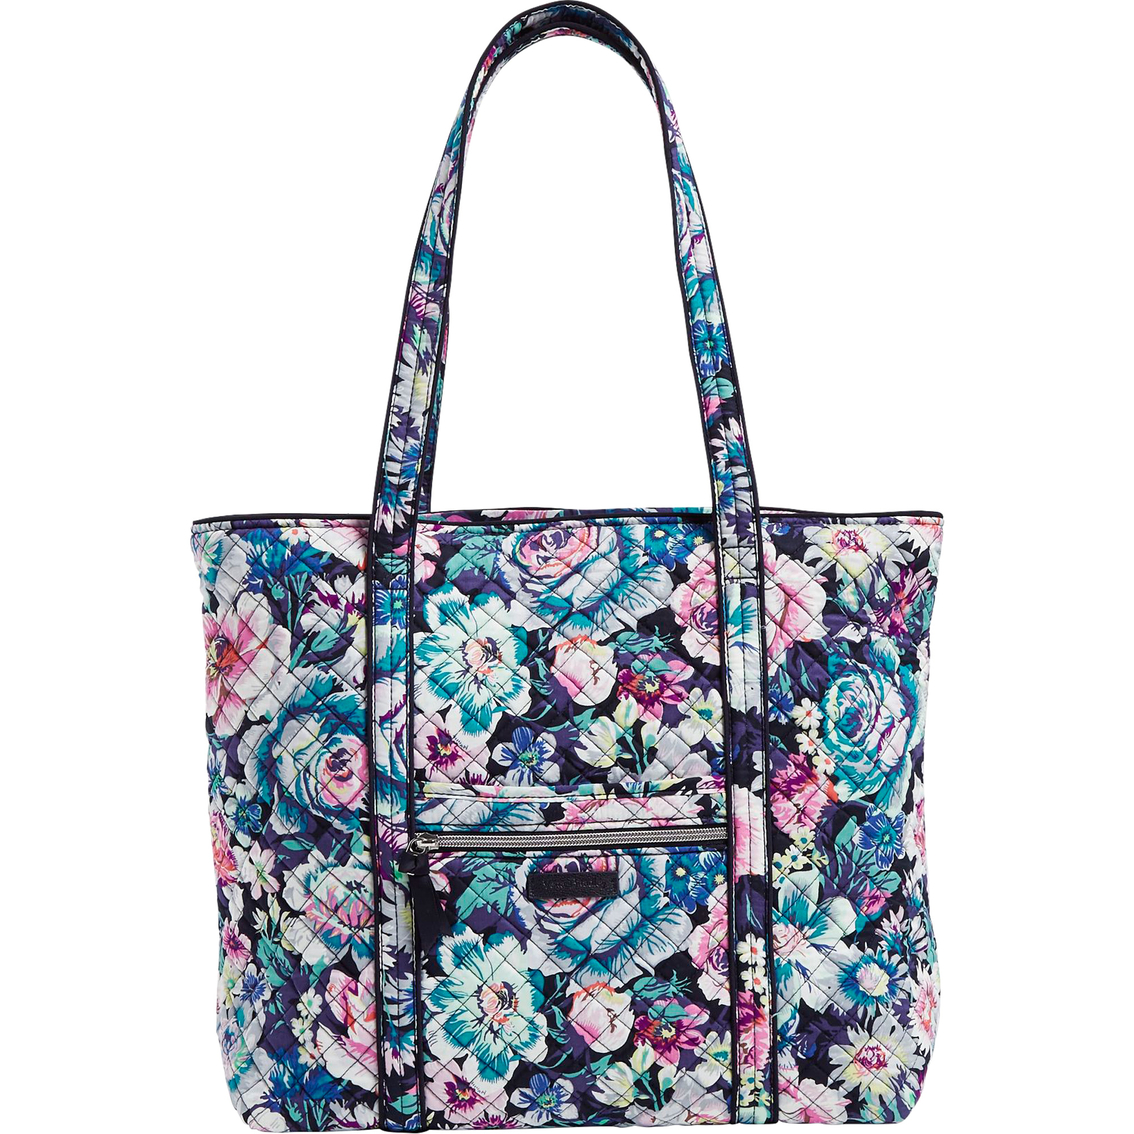 Vera Bradley Garden Grove Tote Large | Totes & Shoppers | Clothing ...